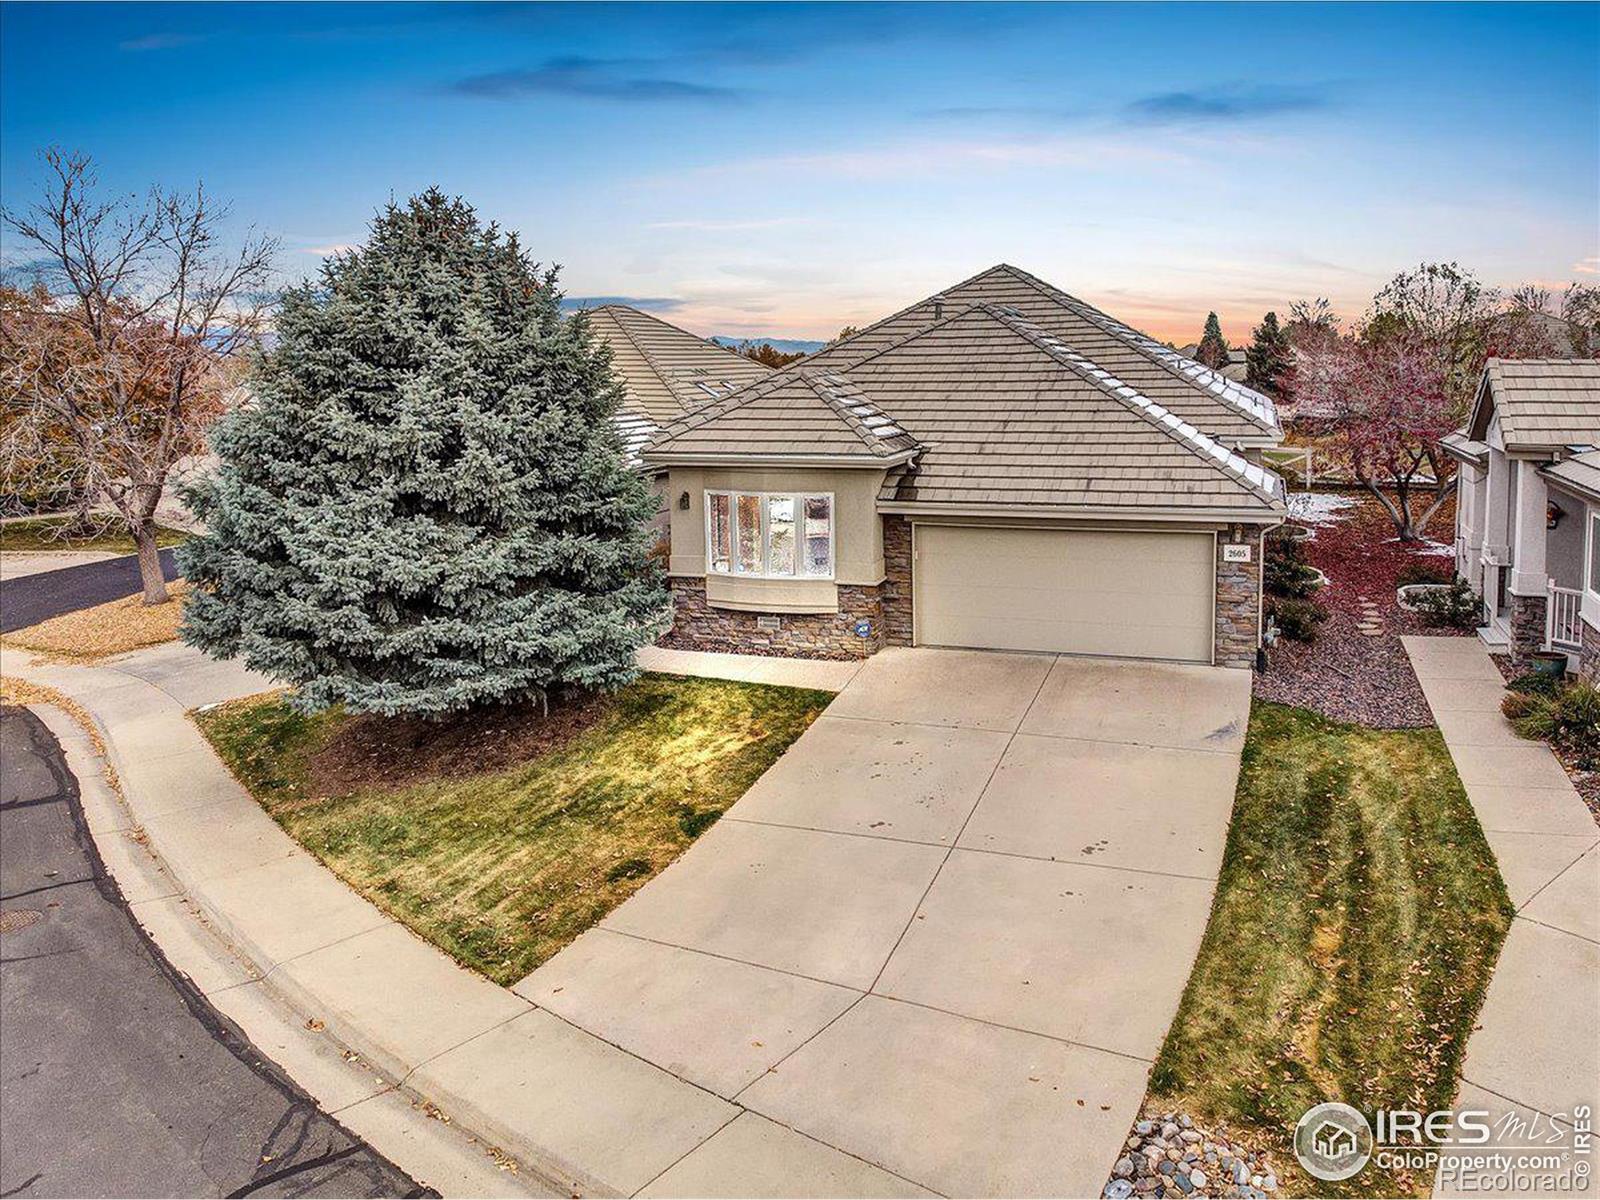 Report Image for 2605 W 107th Place,Westminster, Colorado